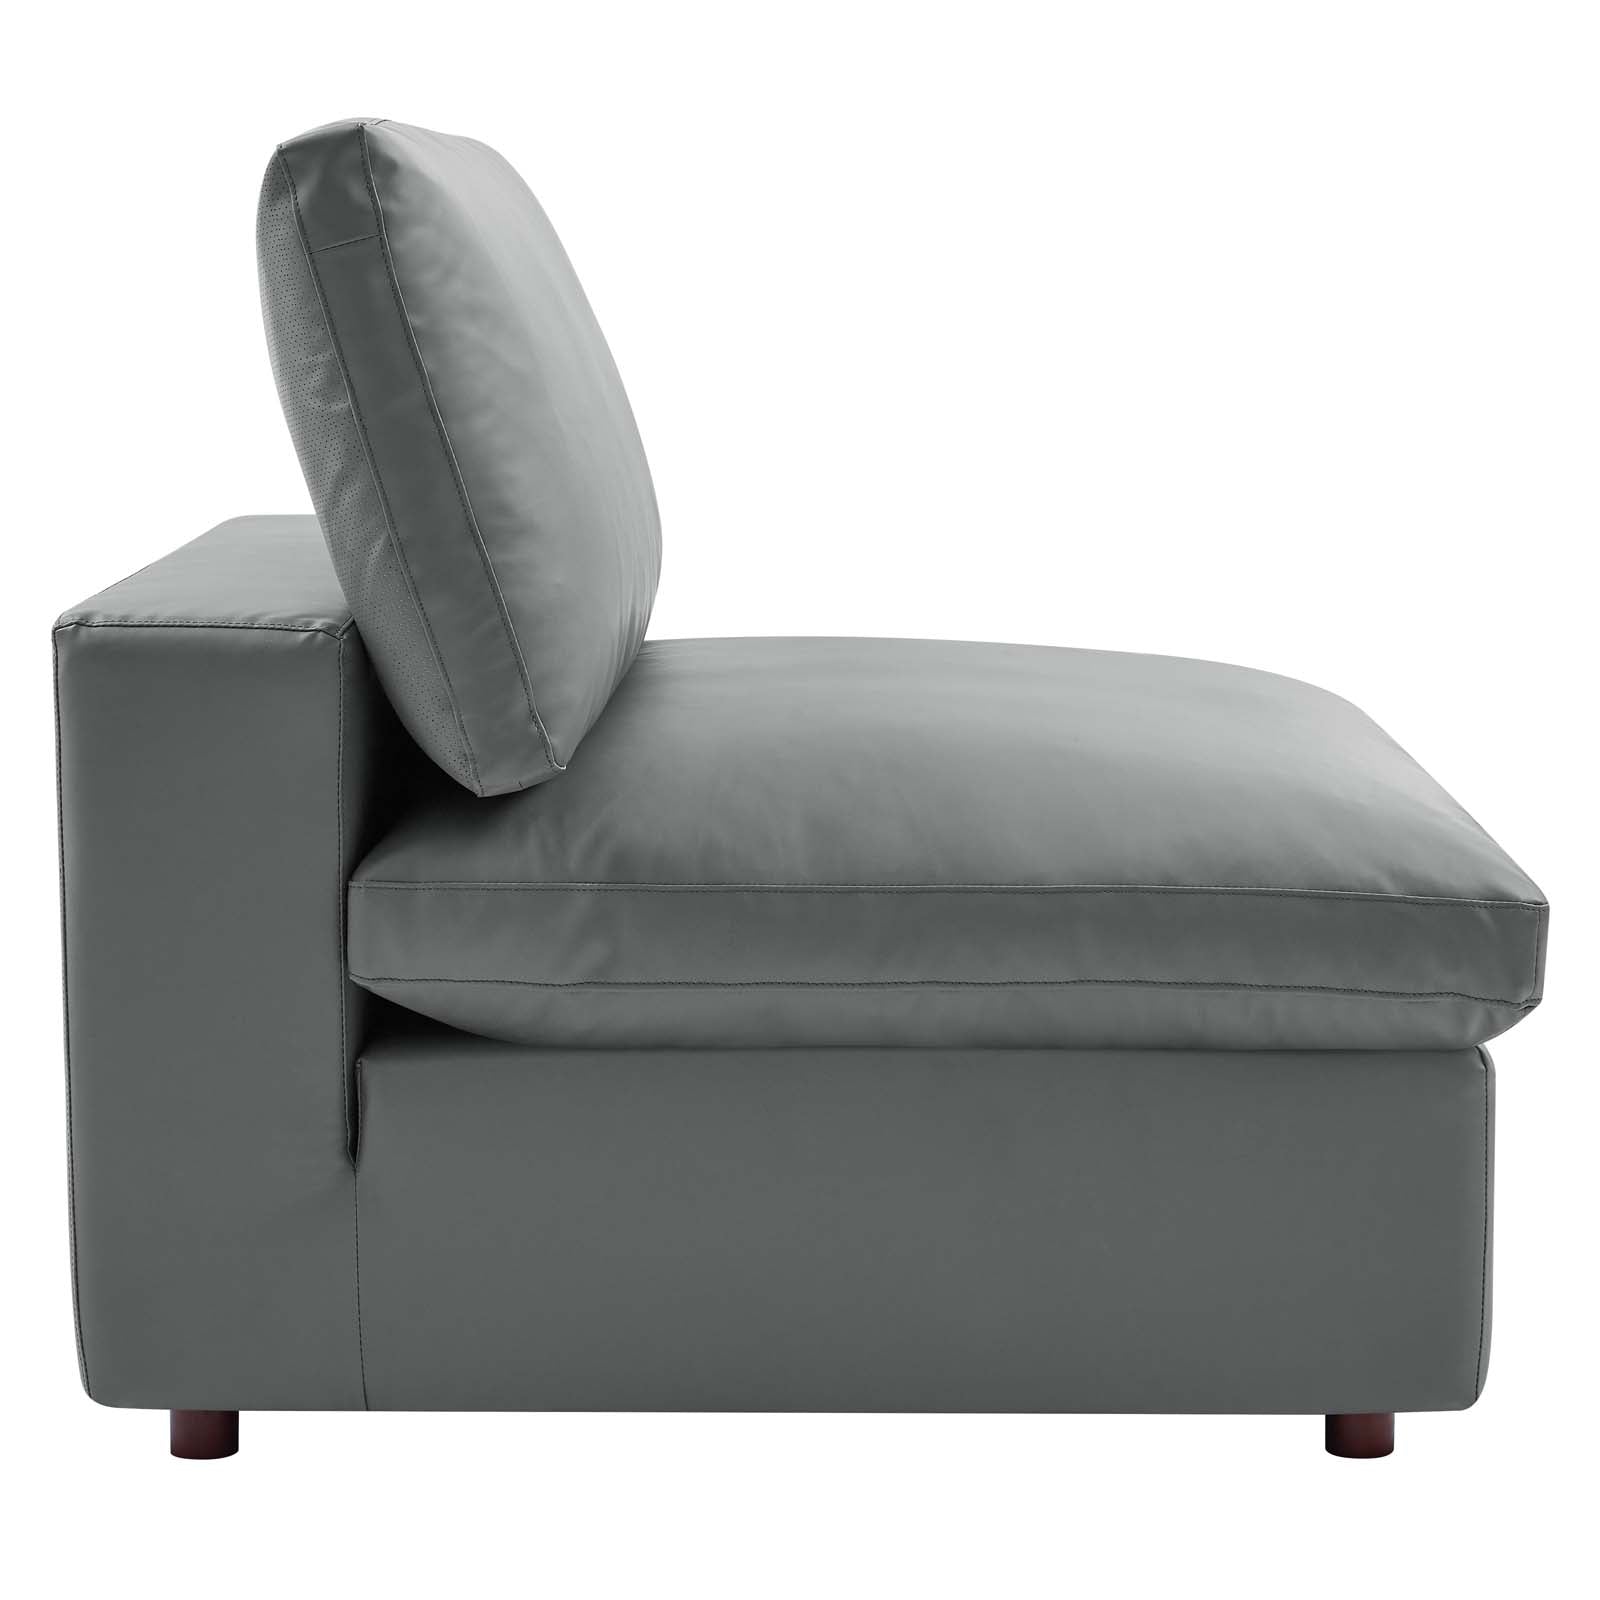 Modway Sofas & Couches - Commix Down Filled Overstuffed Vegan Leather 3 Seater Sofa Gray